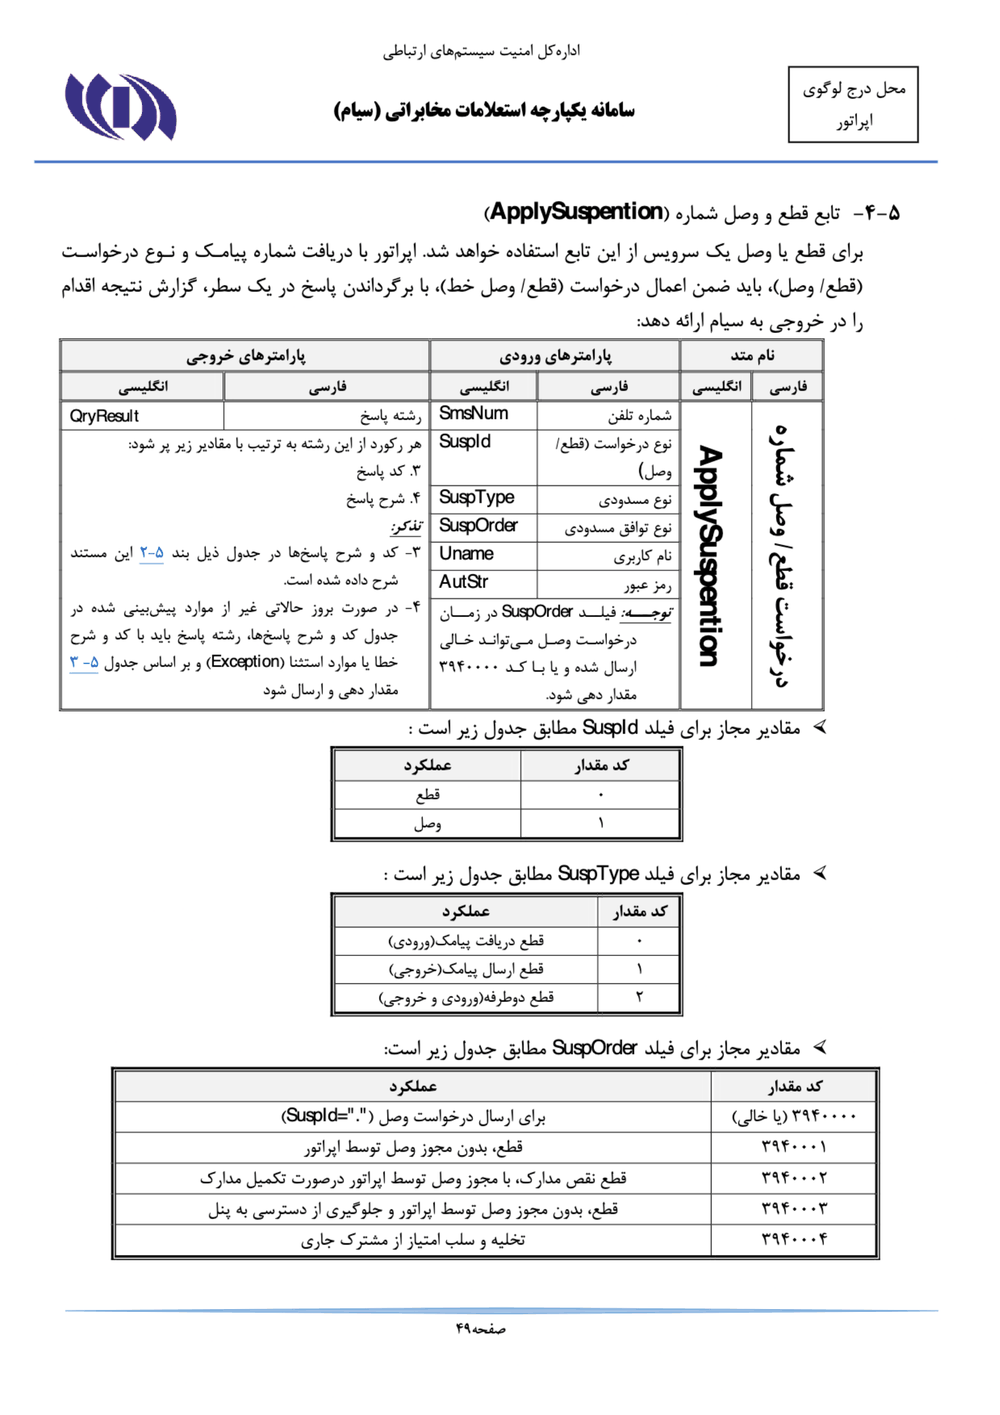 Page 49 from Iran’s SIAM Manual in Persian for Tracking and Controlling Mobile Phones